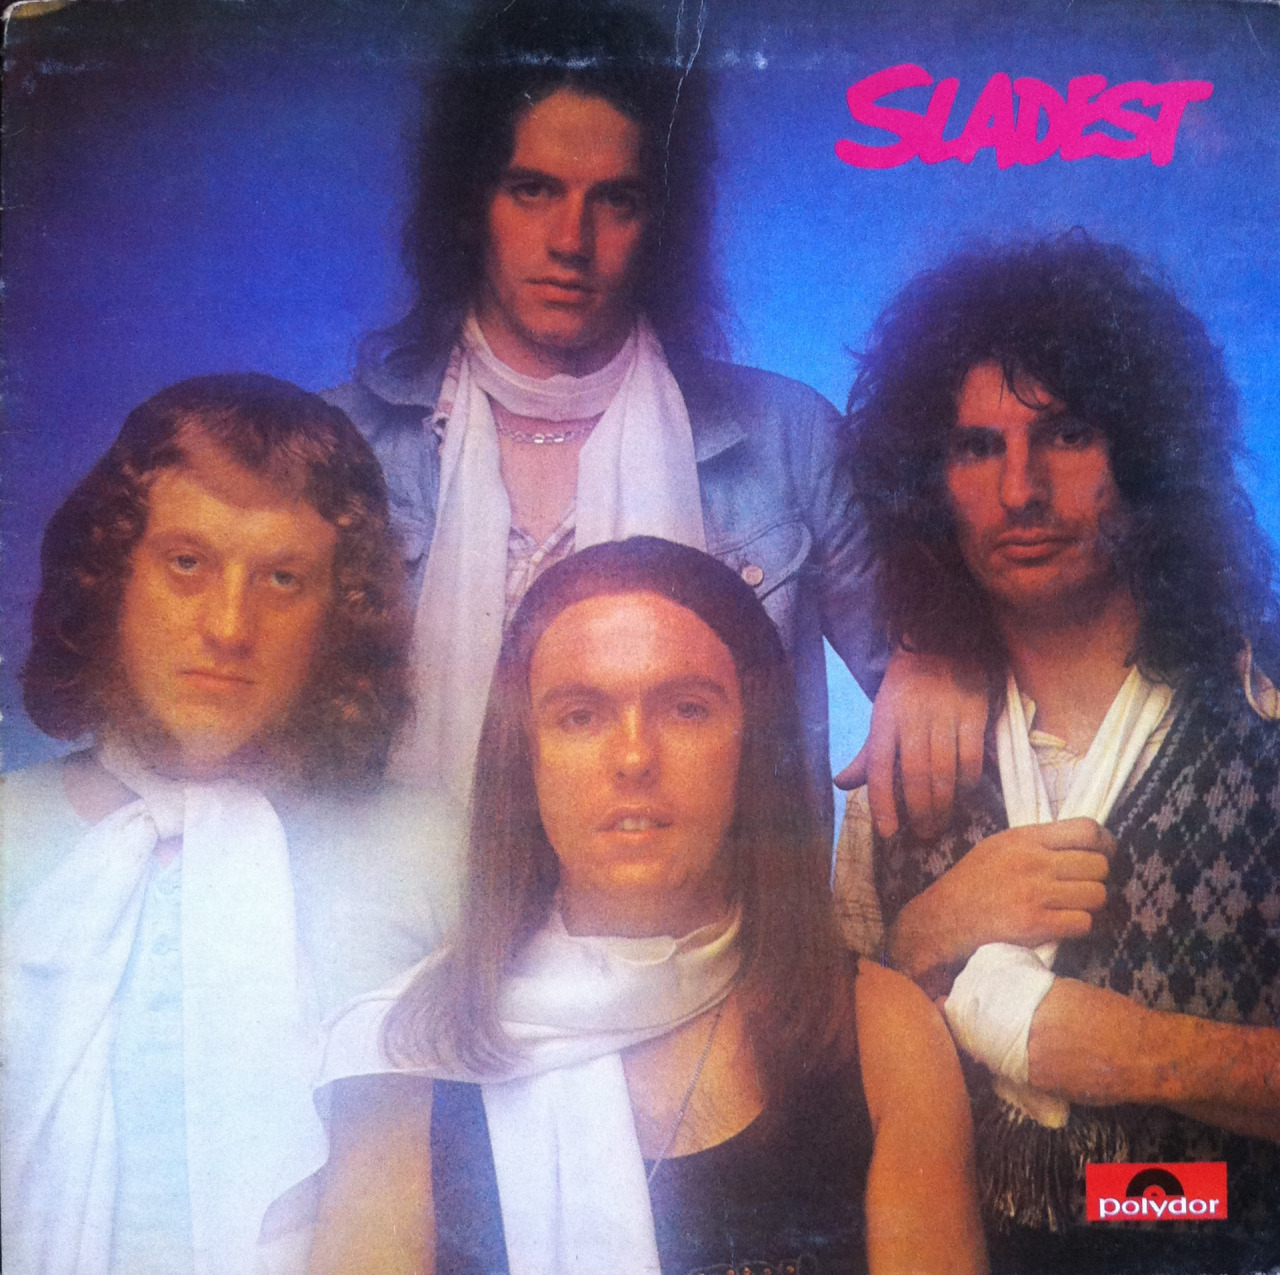 Sladest, by Slade (Polydor, 1973).From a charity shop in Sherwood, Nottingham.Click